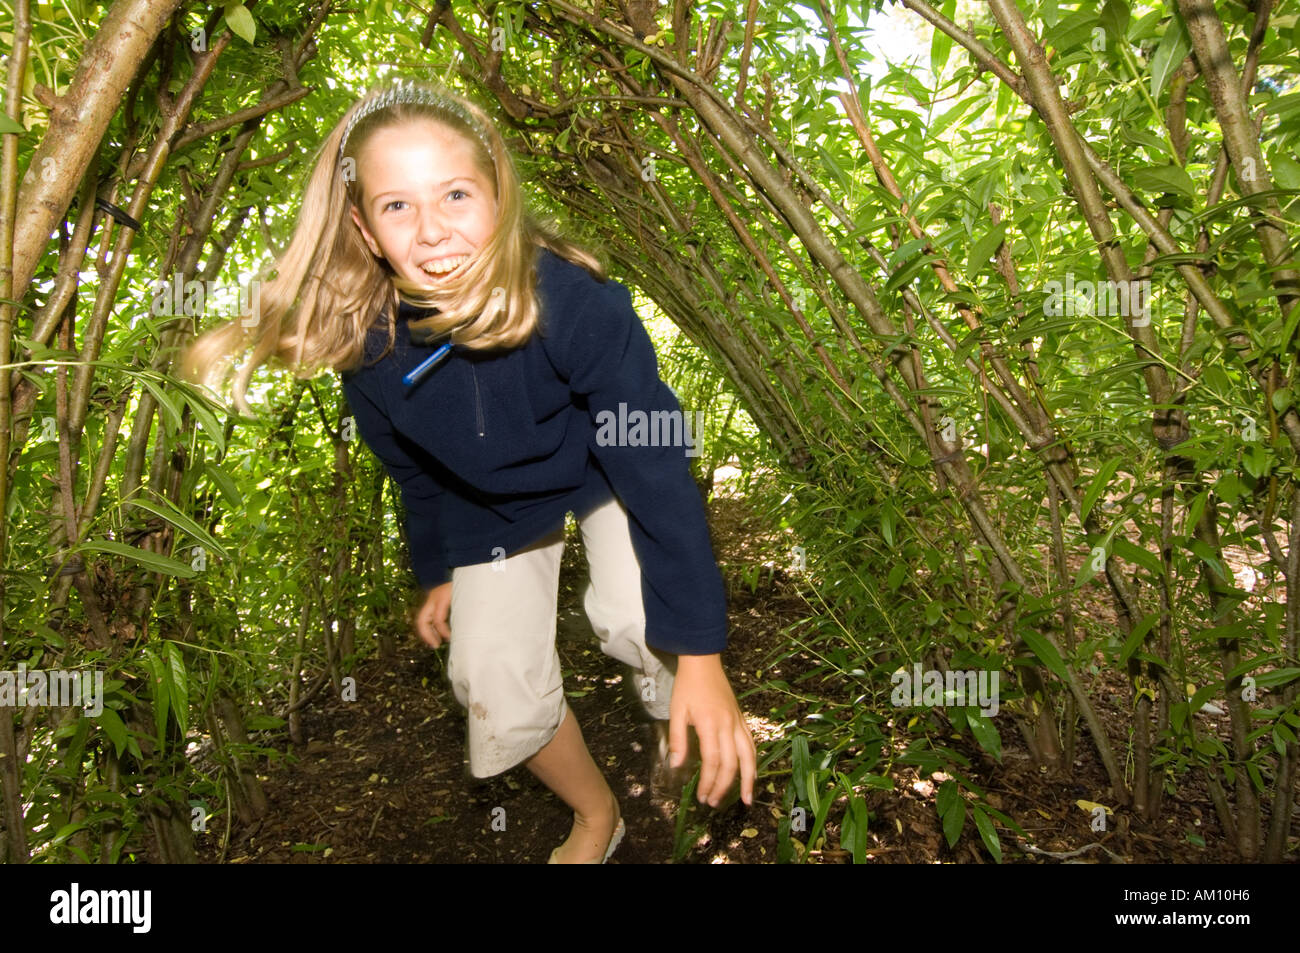 The Botanic Garden of Wales Llanarthne Carmarthen happy laughing young girl playing in living green willow tunnel, UK Stock Photo